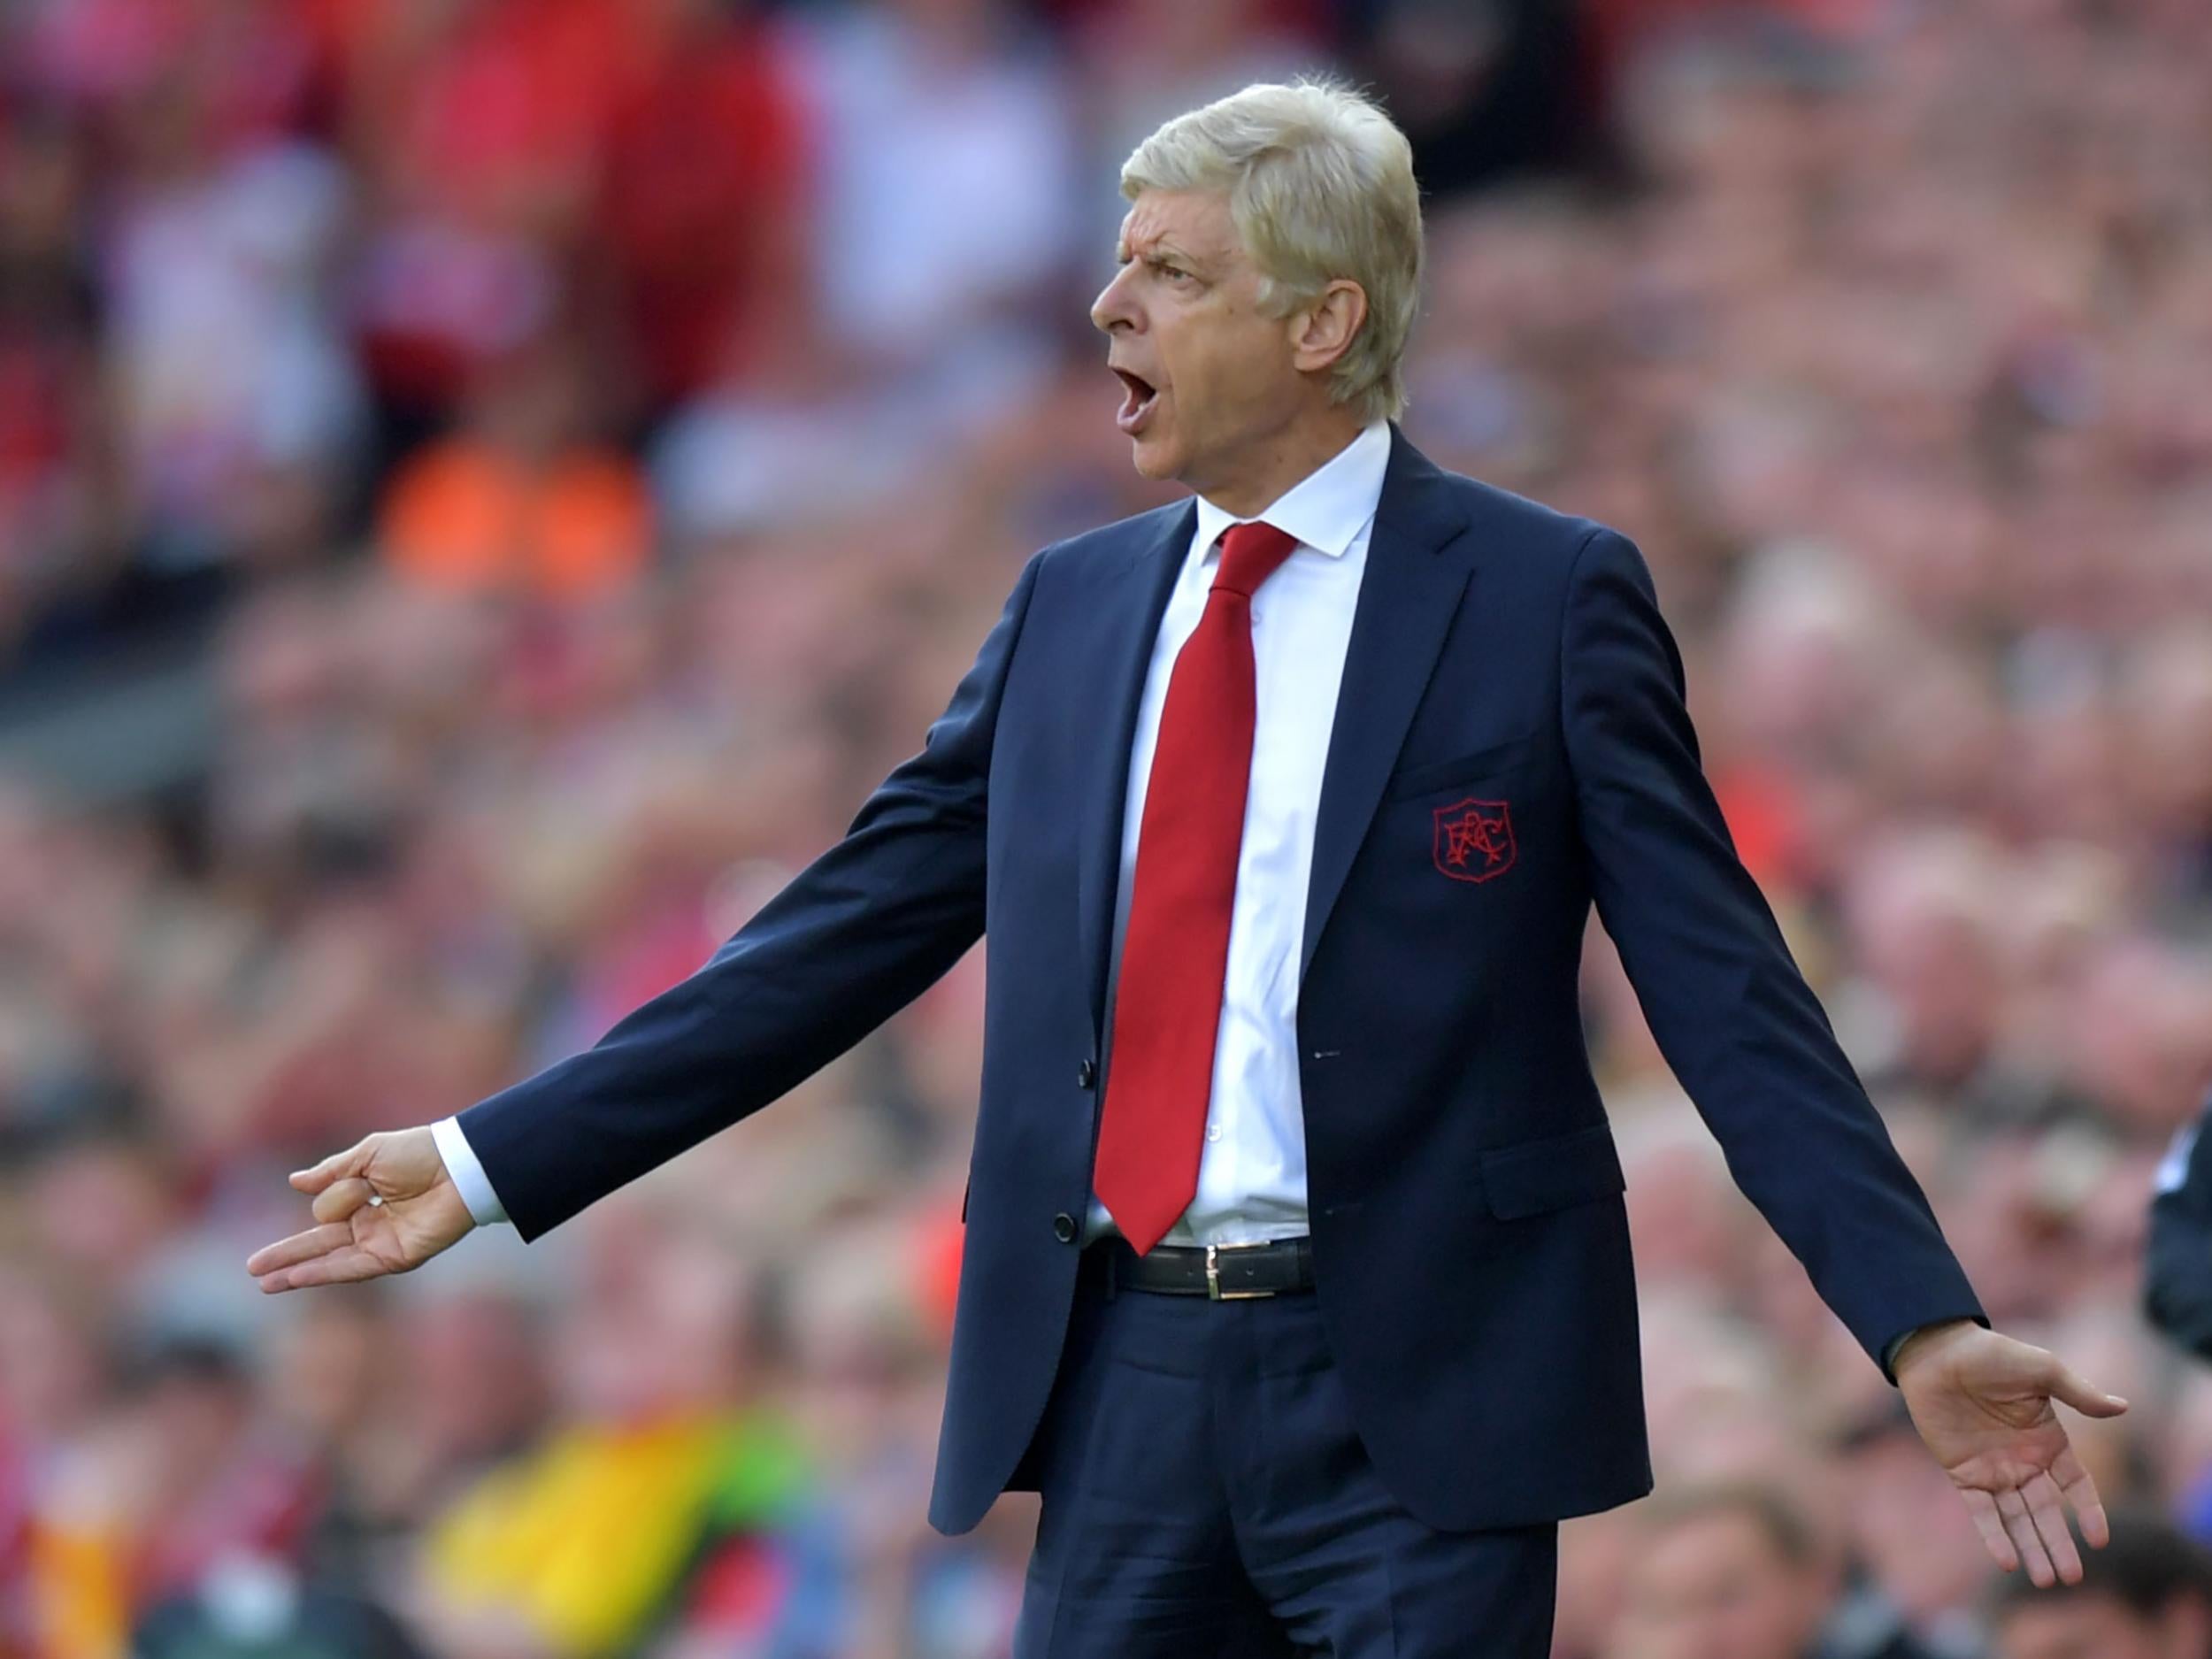 Arsene Wenger is once again under pressure at Arsenal after a poor start to the season